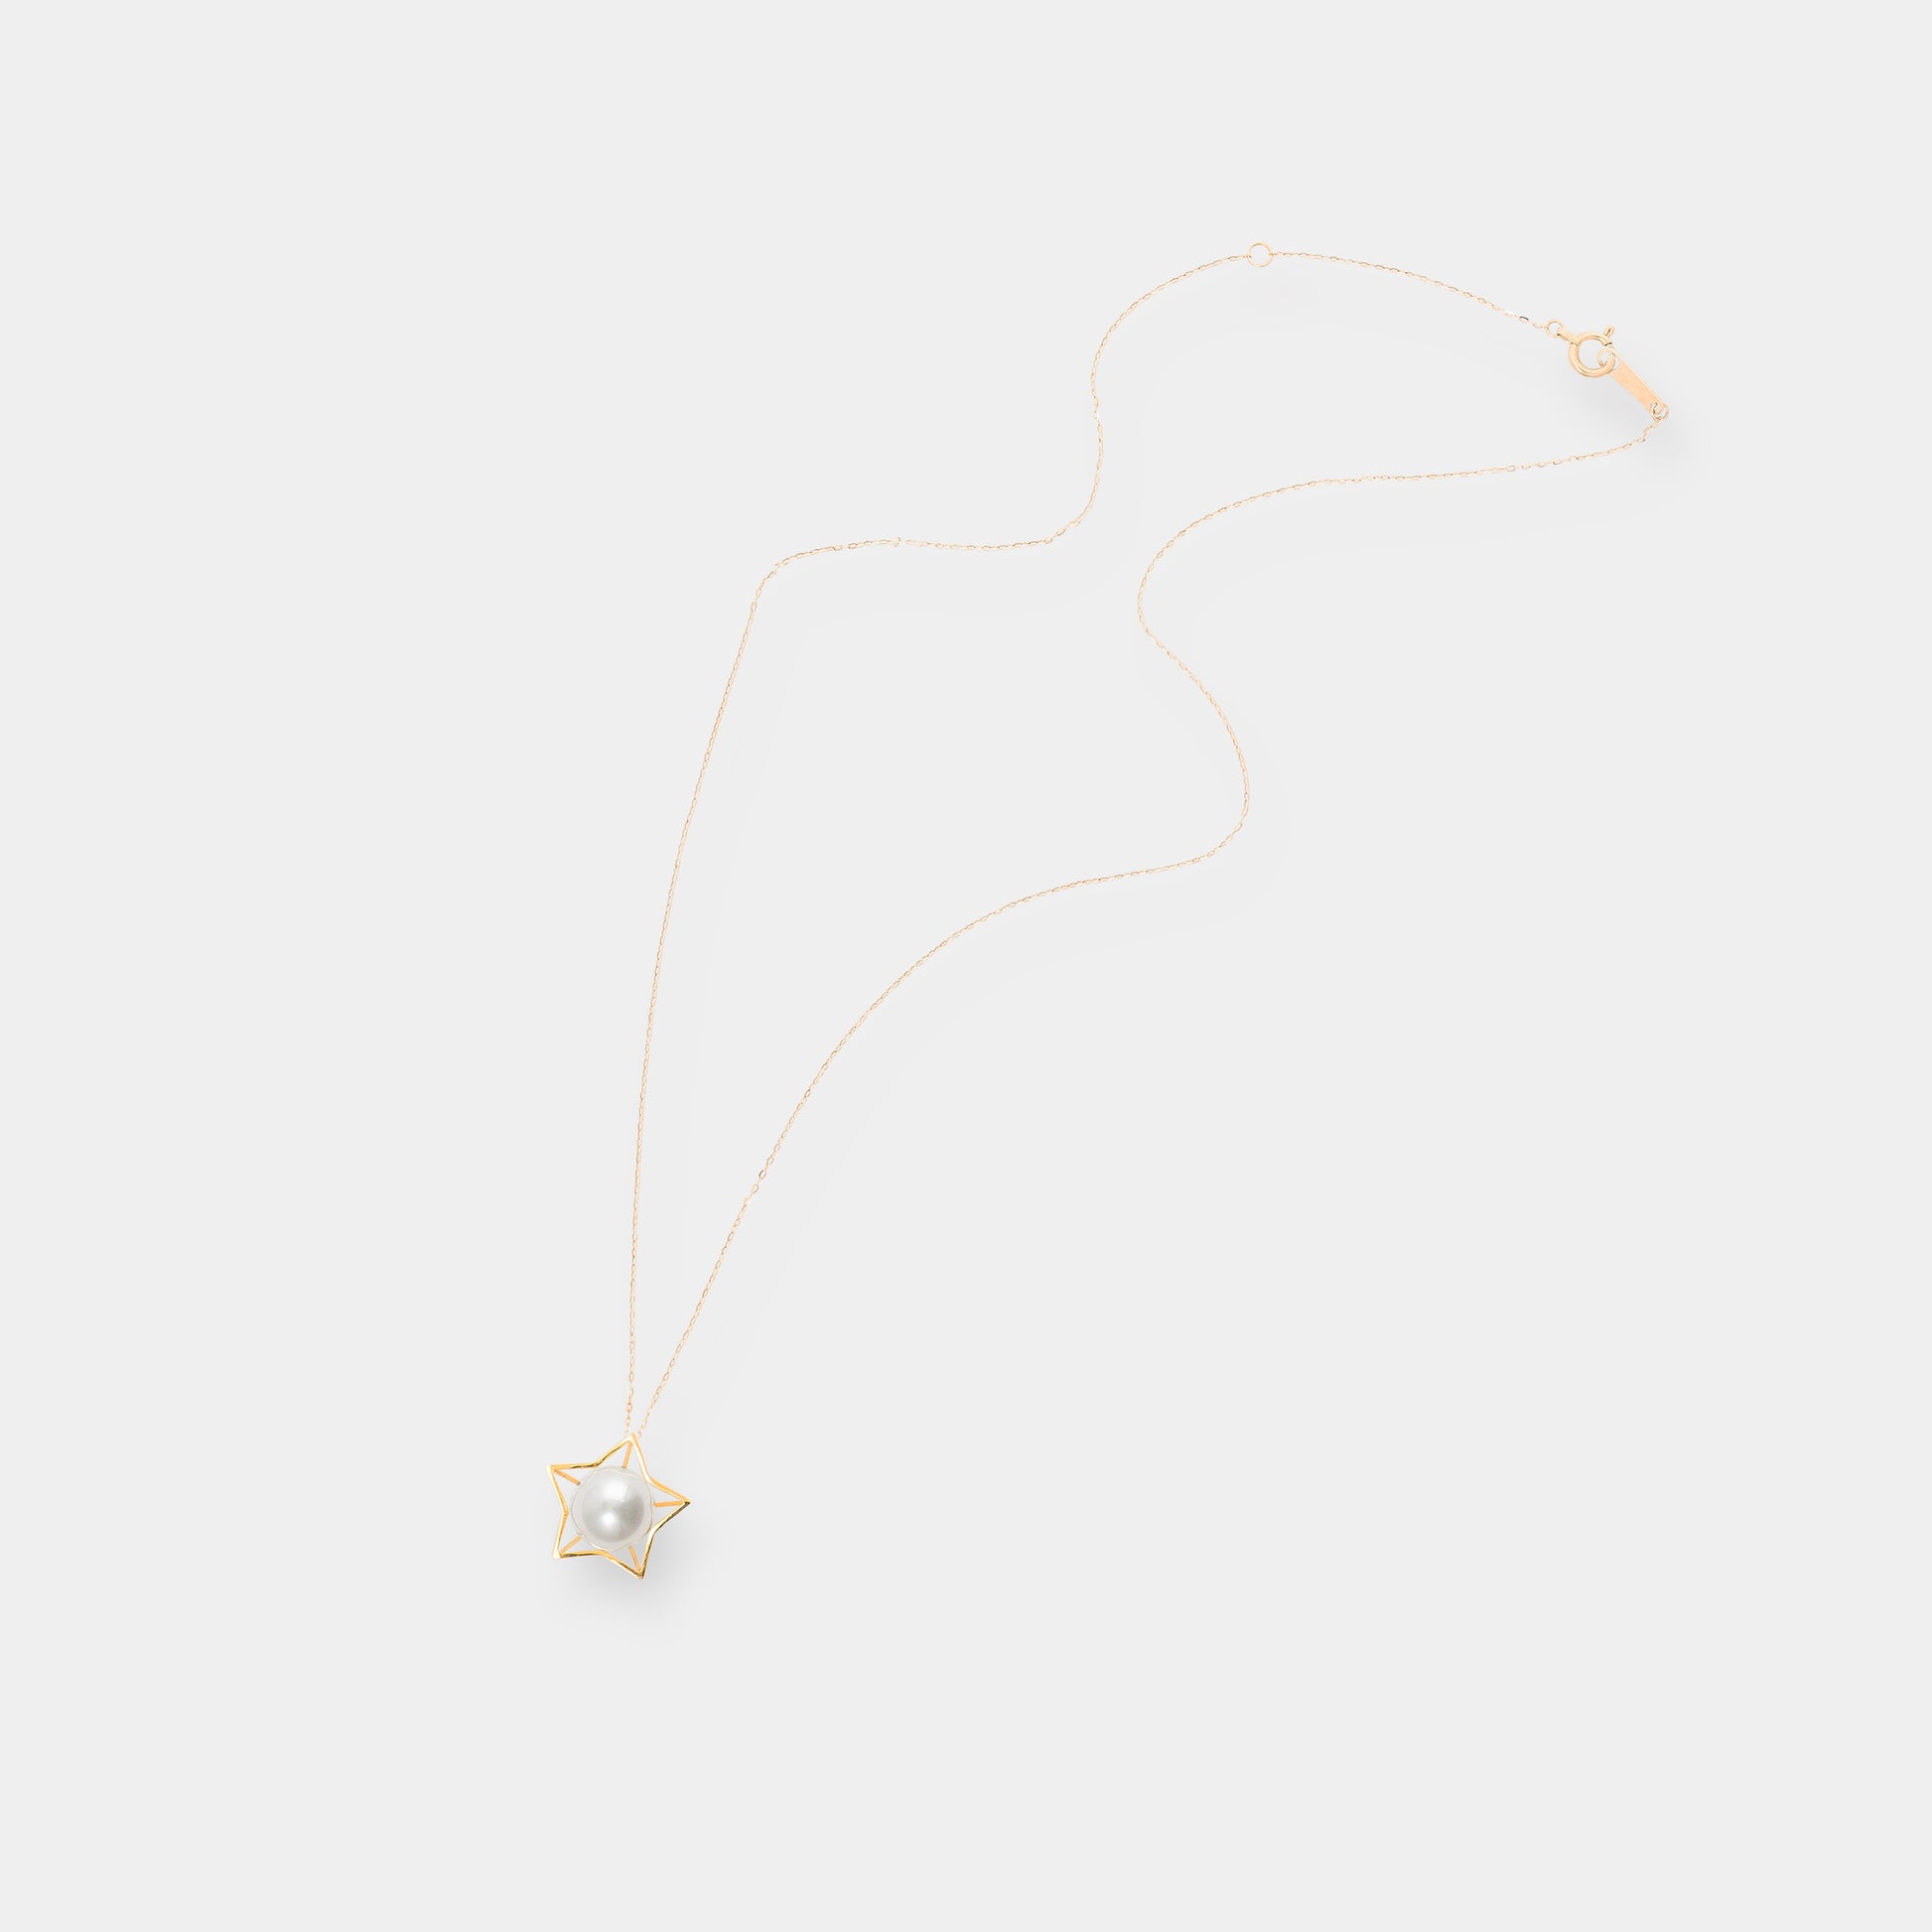 Star Gold Pearl Necklace